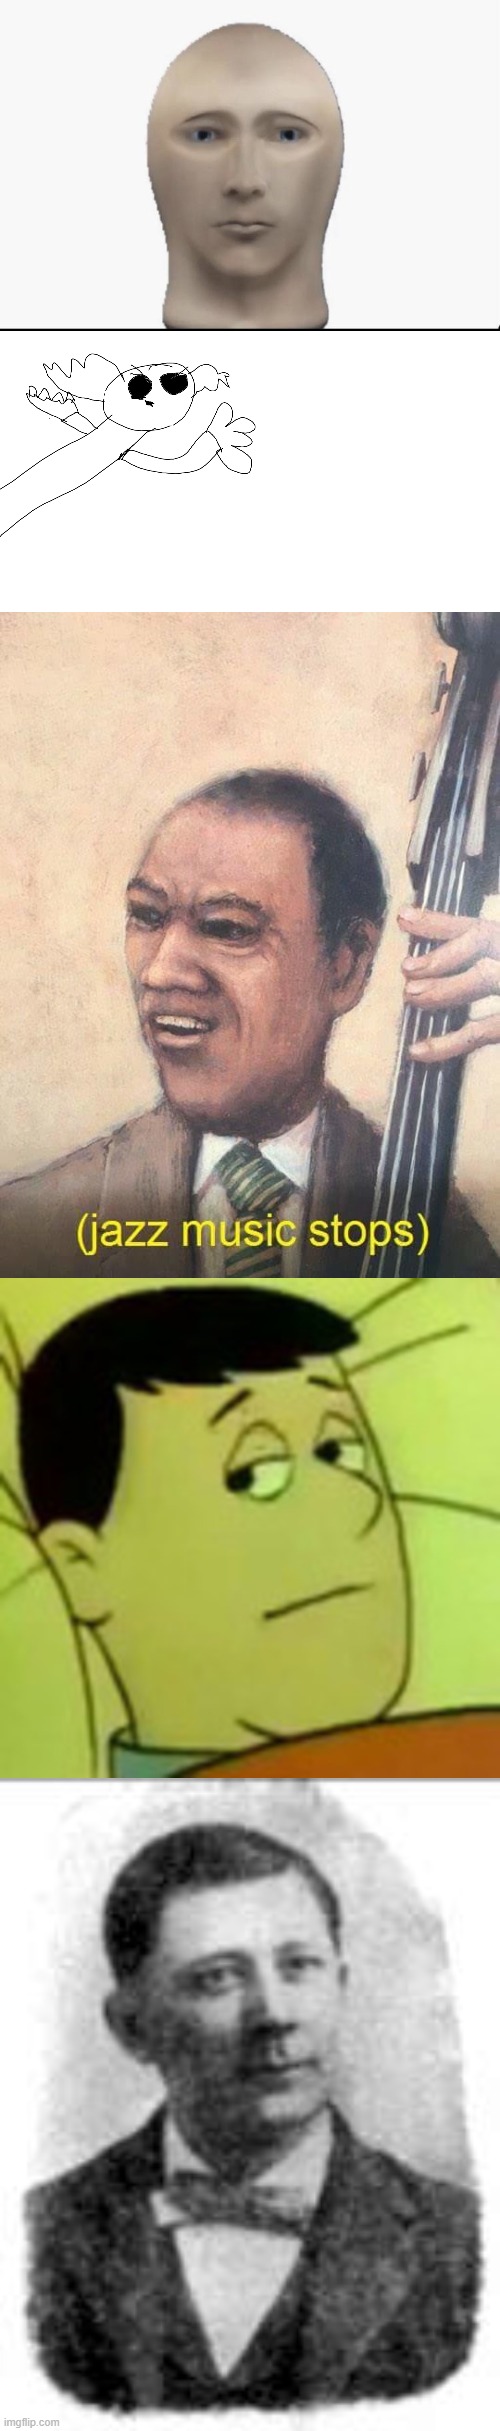 Me and the Bois Reacting to Front Facing Meme Man | image tagged in jazz music stops,meme man looking forward | made w/ Imgflip meme maker